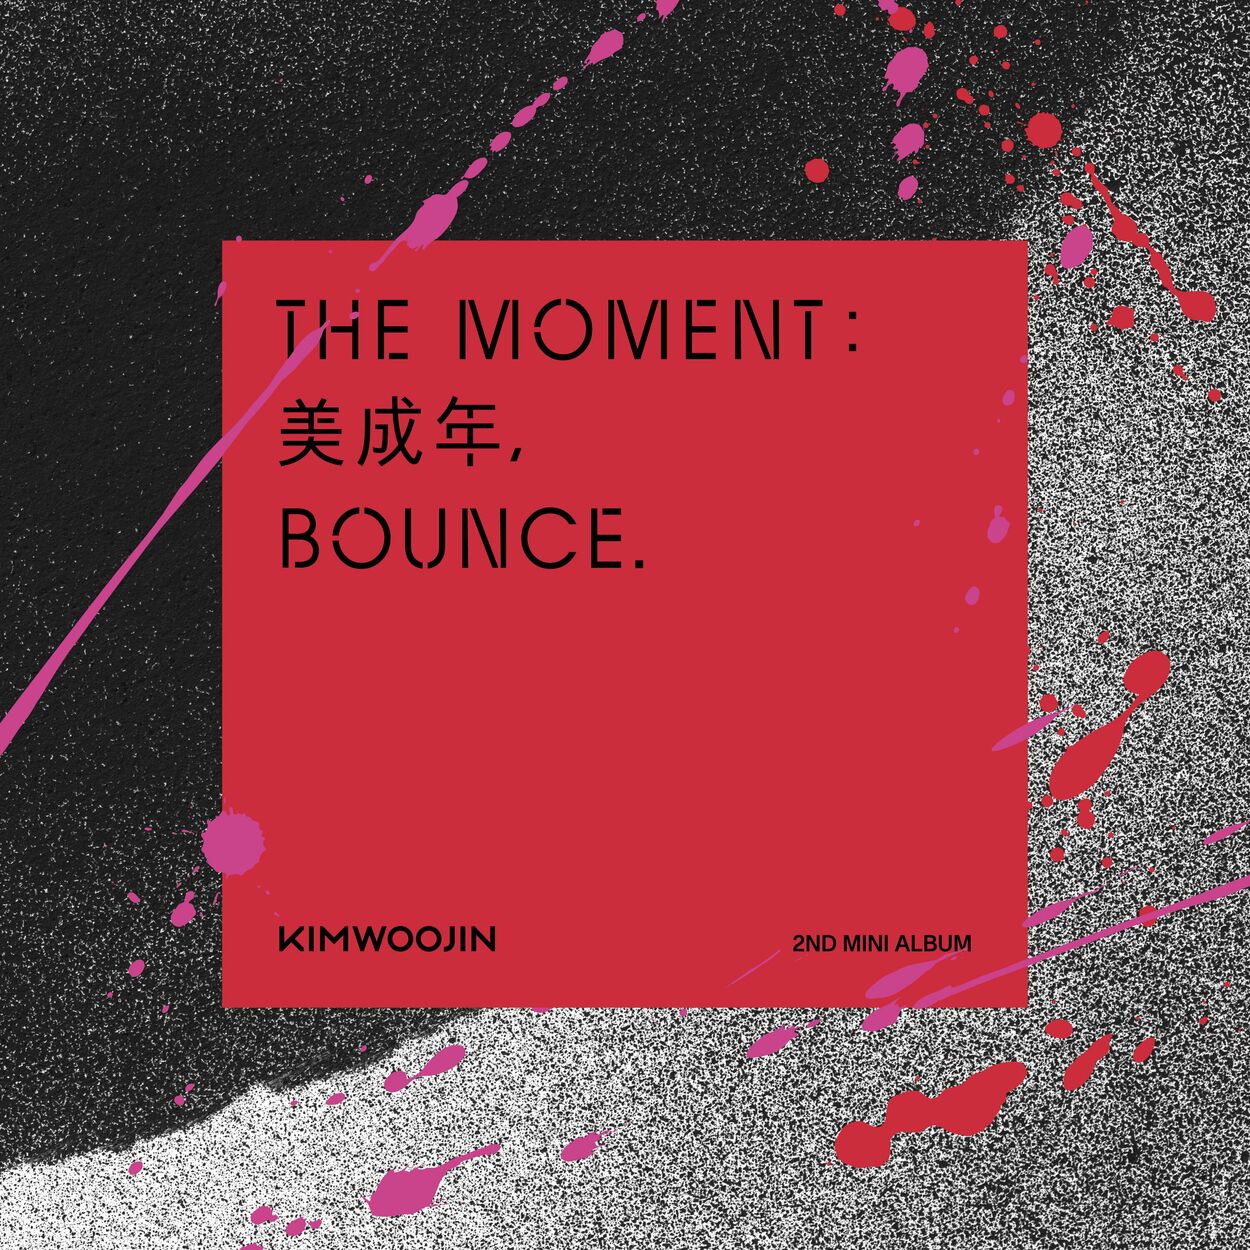 Kim Woojin – The moment : 美成年, Bounce. – EP